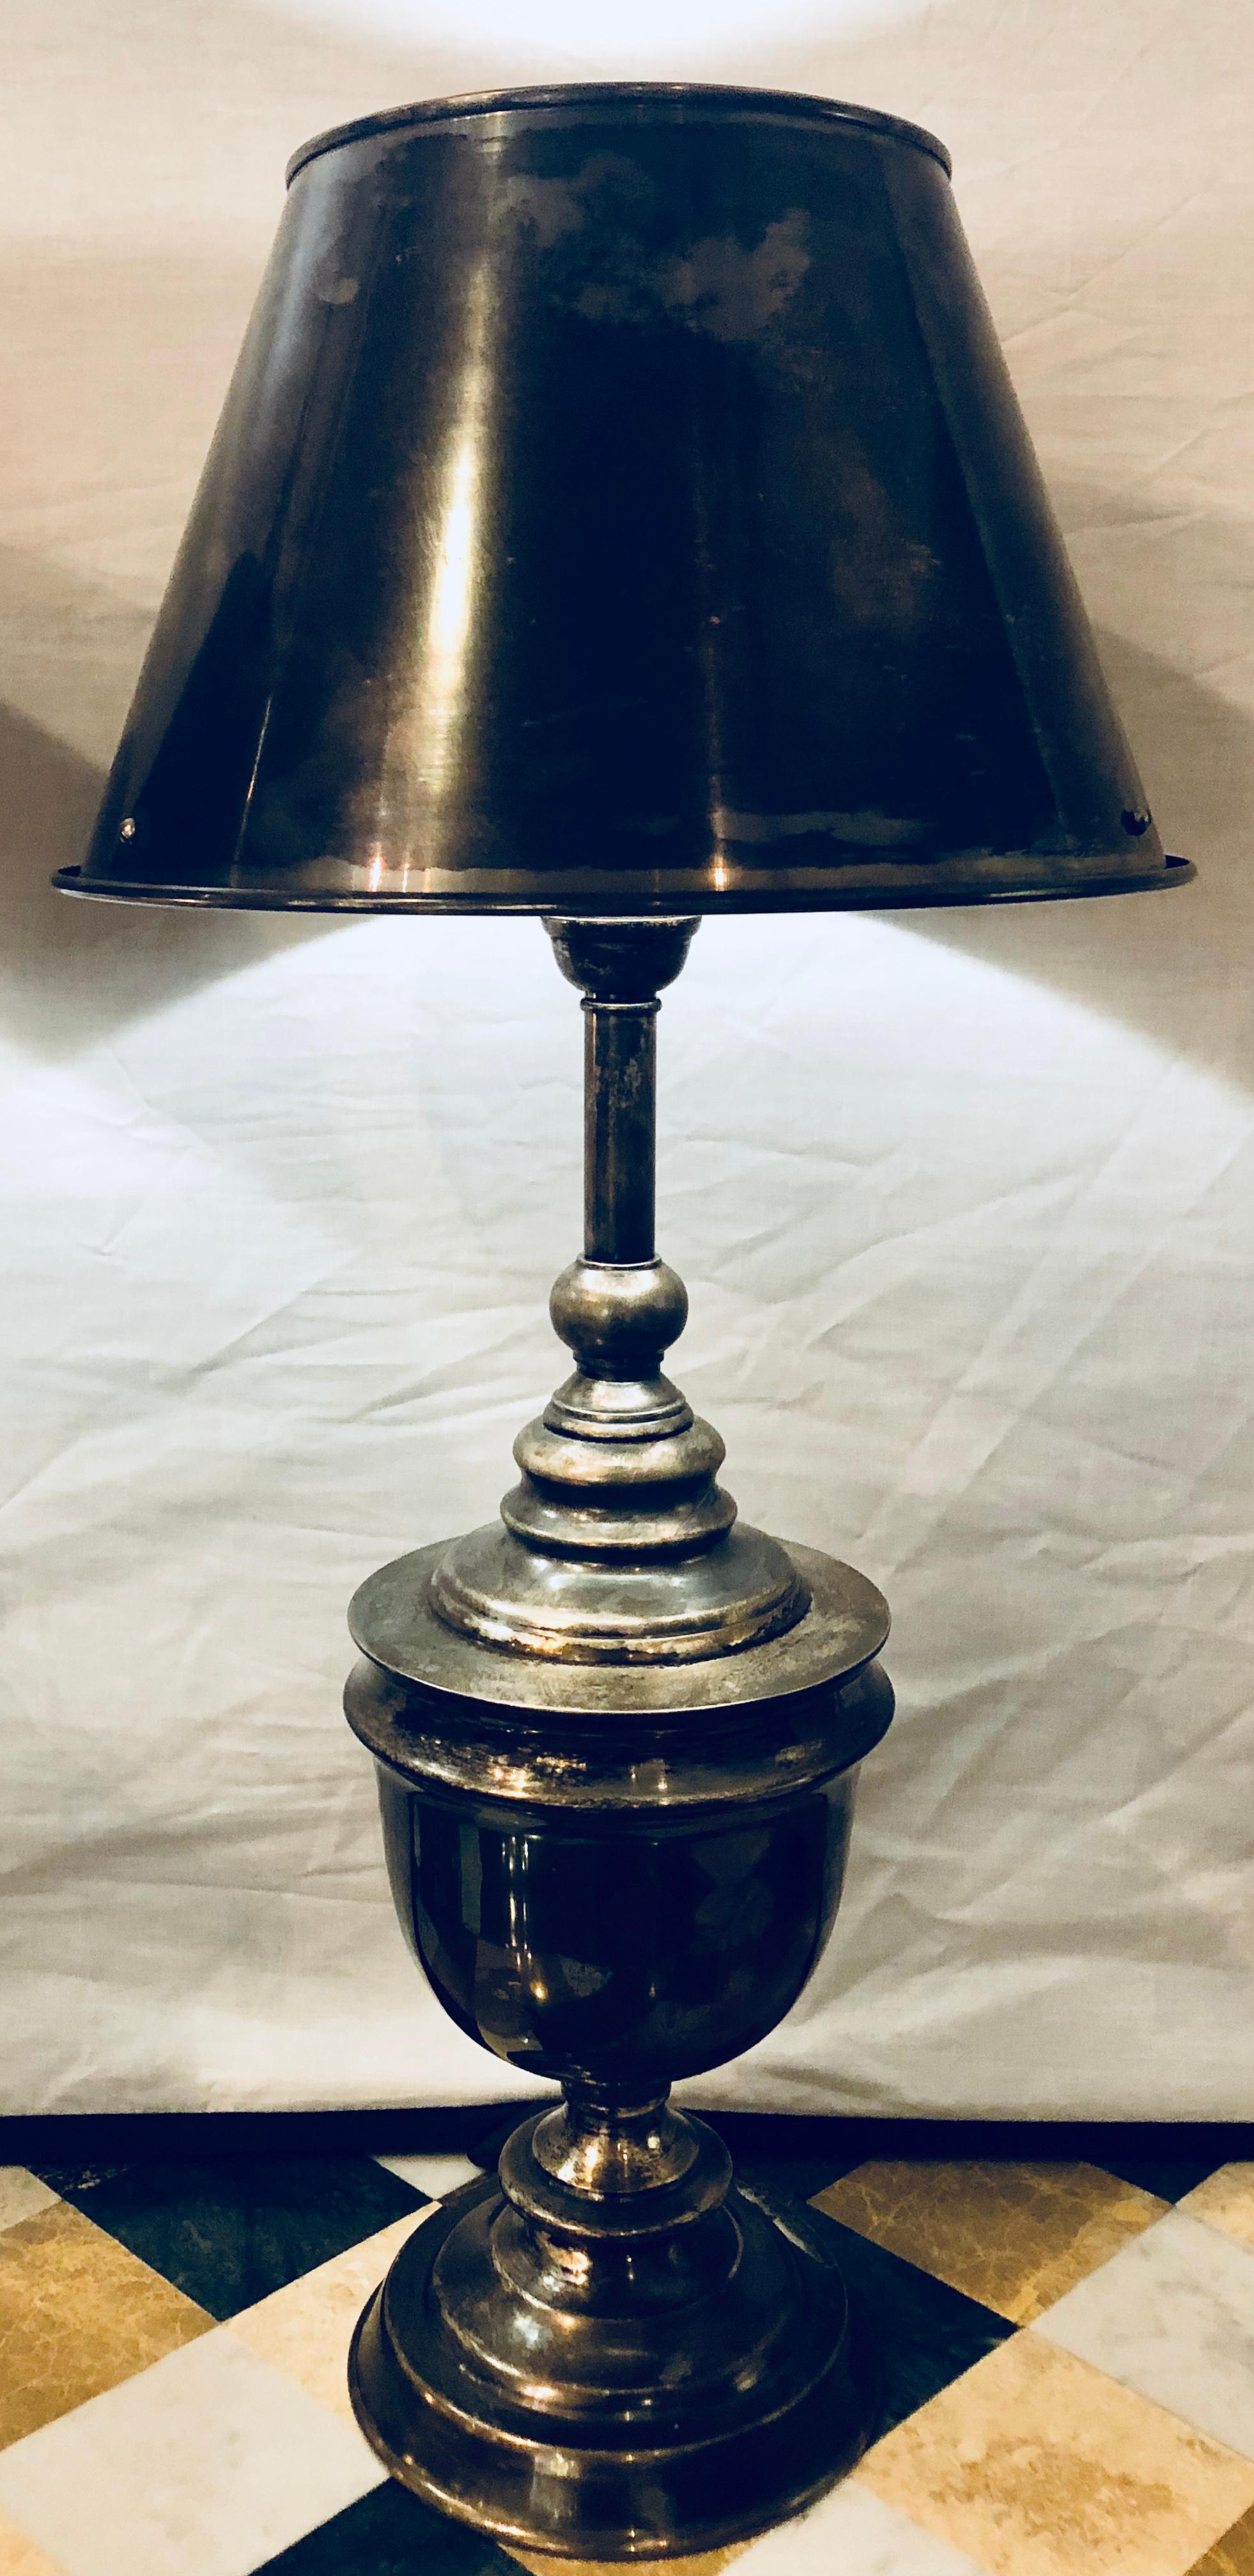 A pair of industrial nickel finish urn lamps with matching shades. This fine pair are weathered in appearance however, should you desire they would certainly polish up wonderfully.